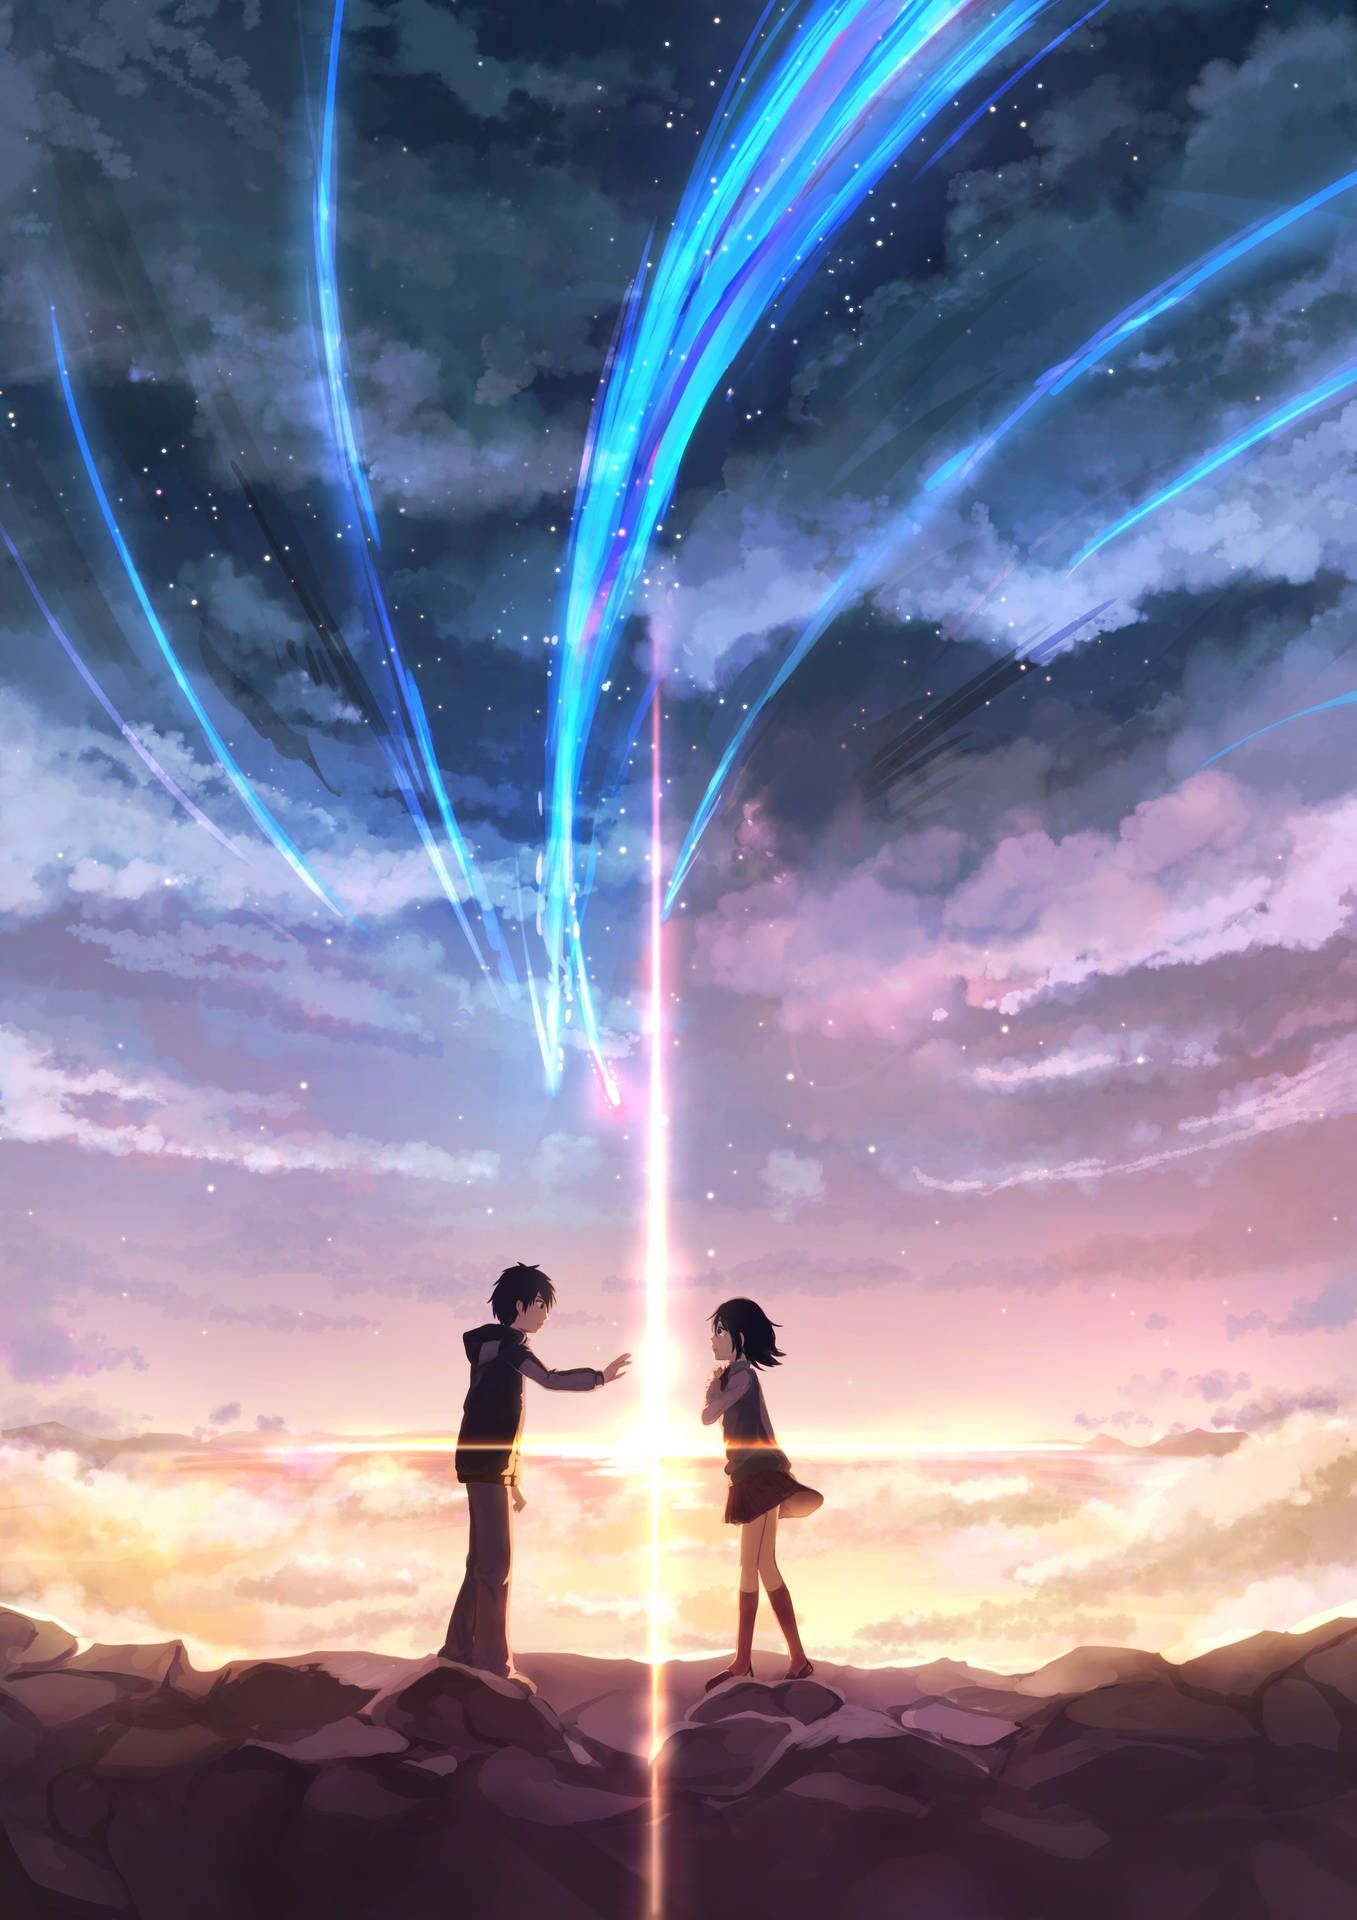 Your Name Meeting With Falling Comets Background